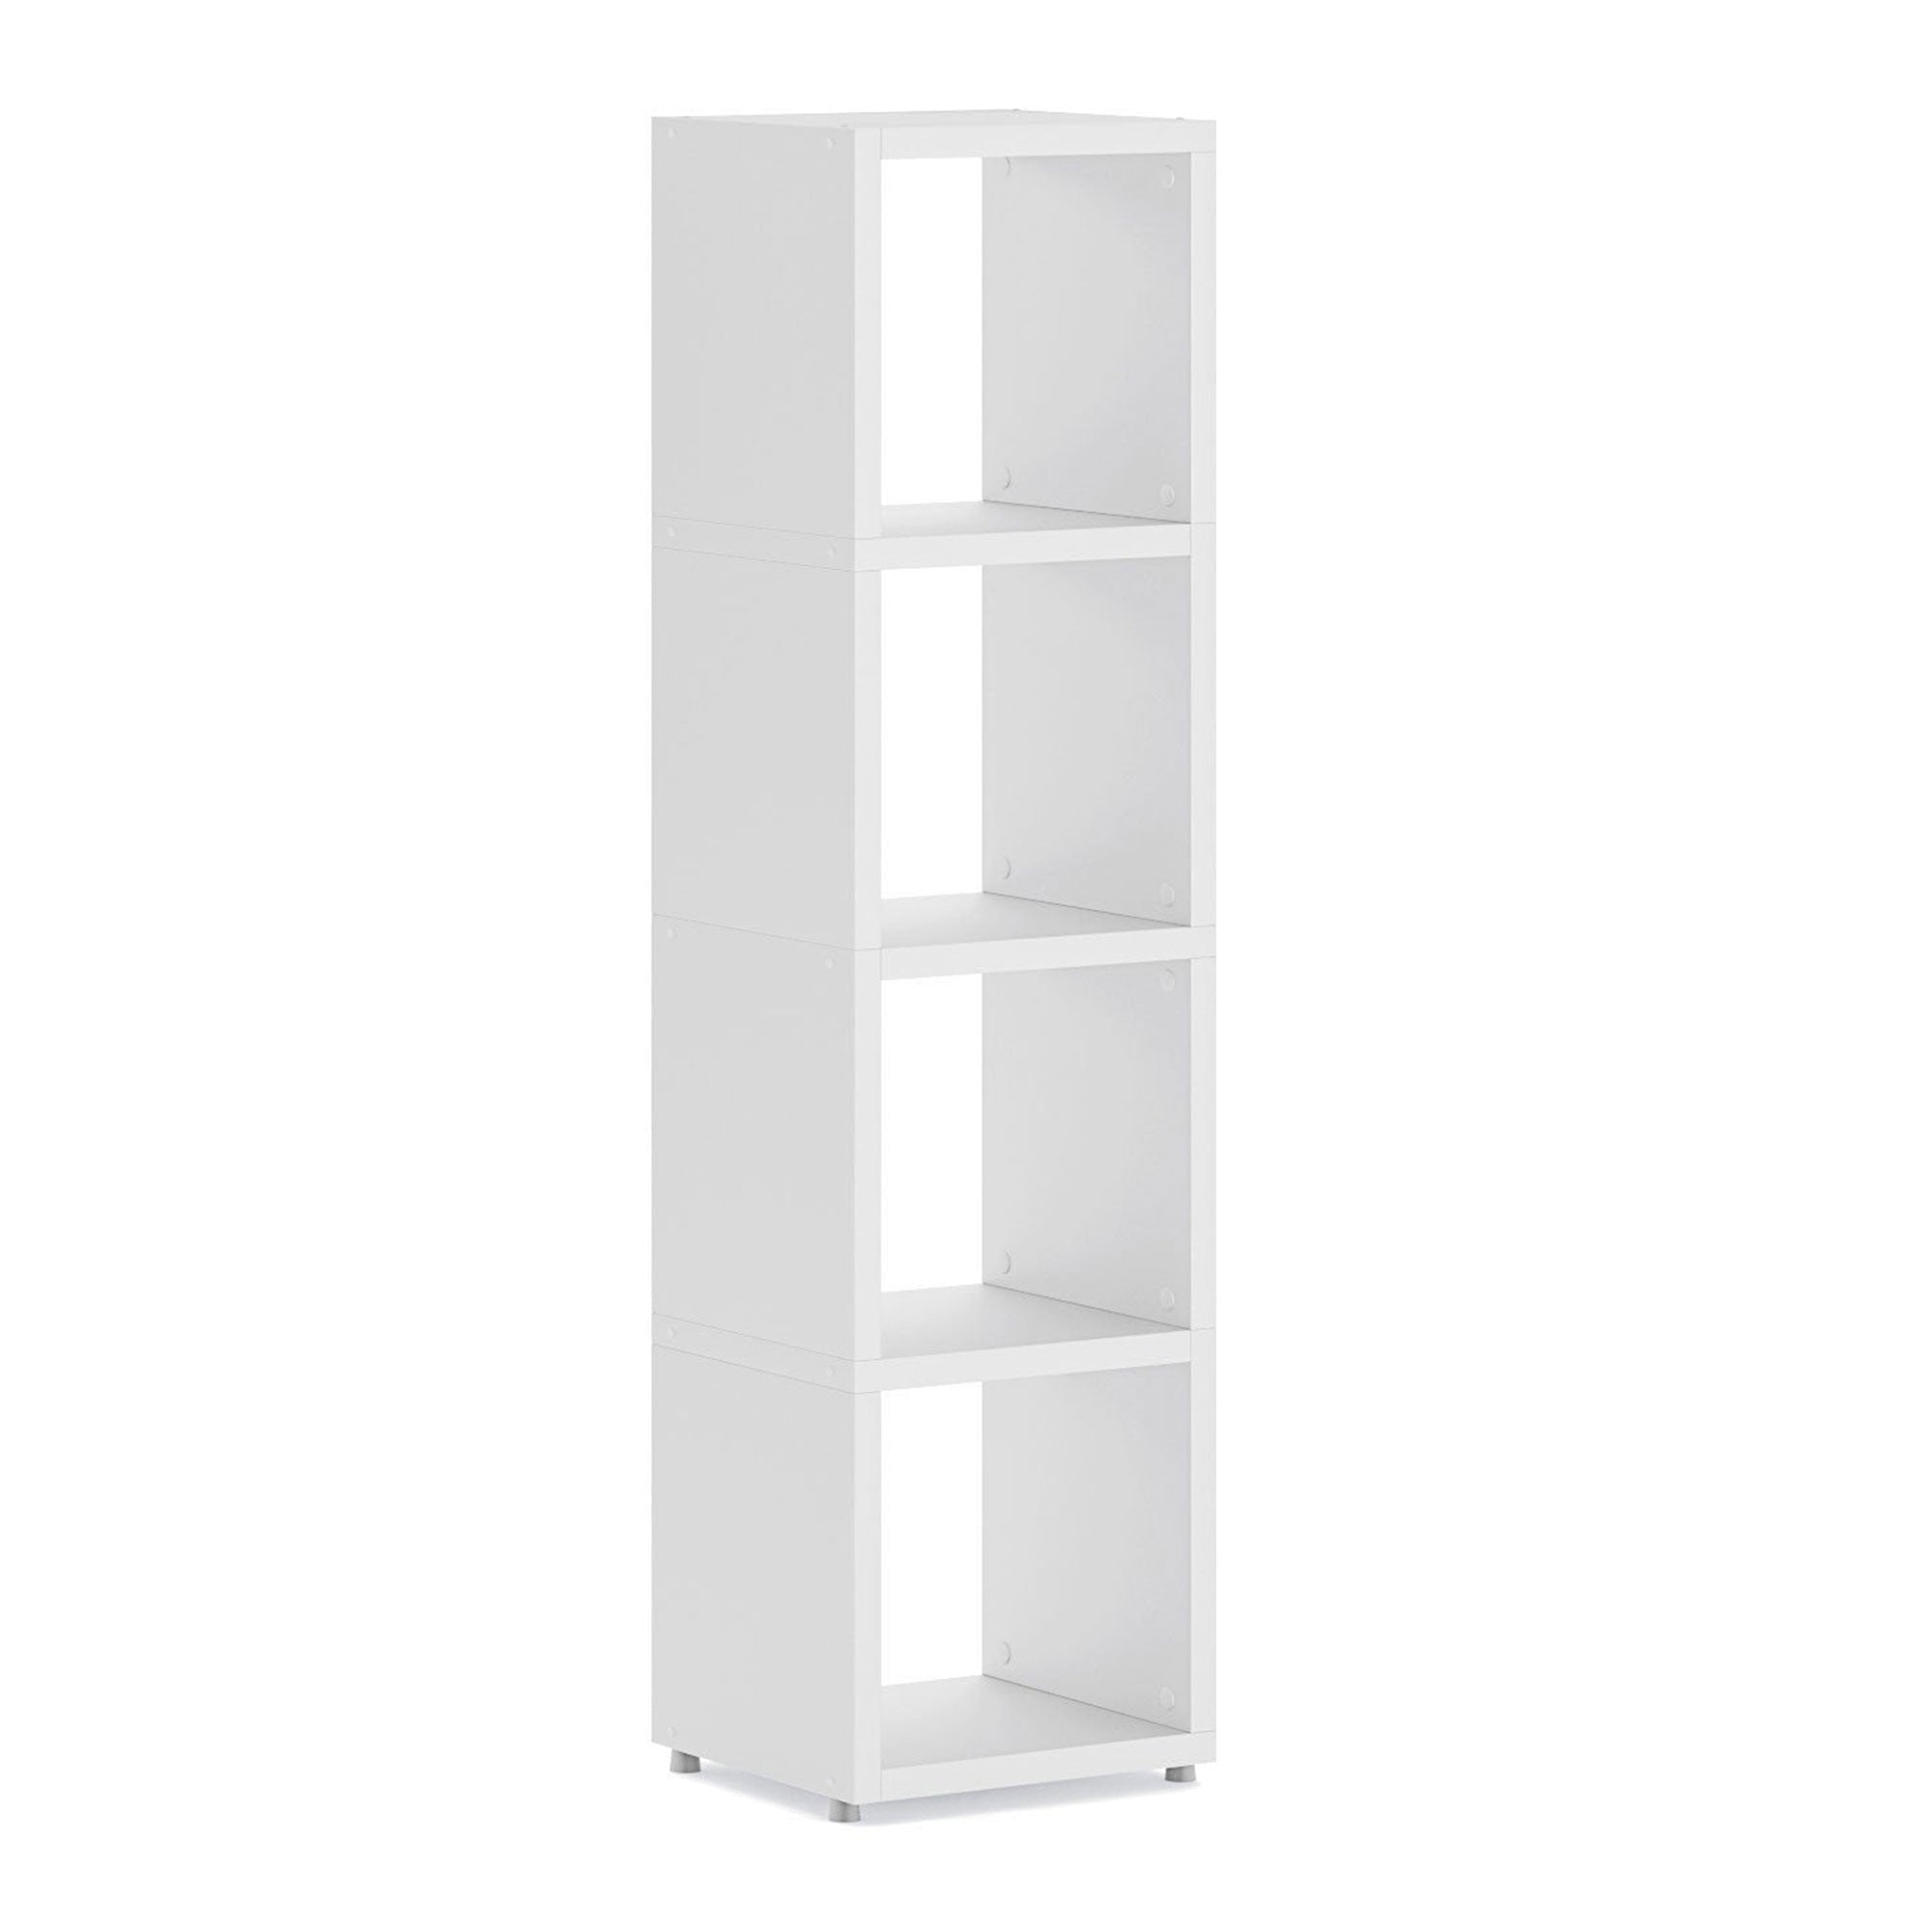 Boon 4x Cube Shelf Storage System - 1470x390x330mm - Office Products Online